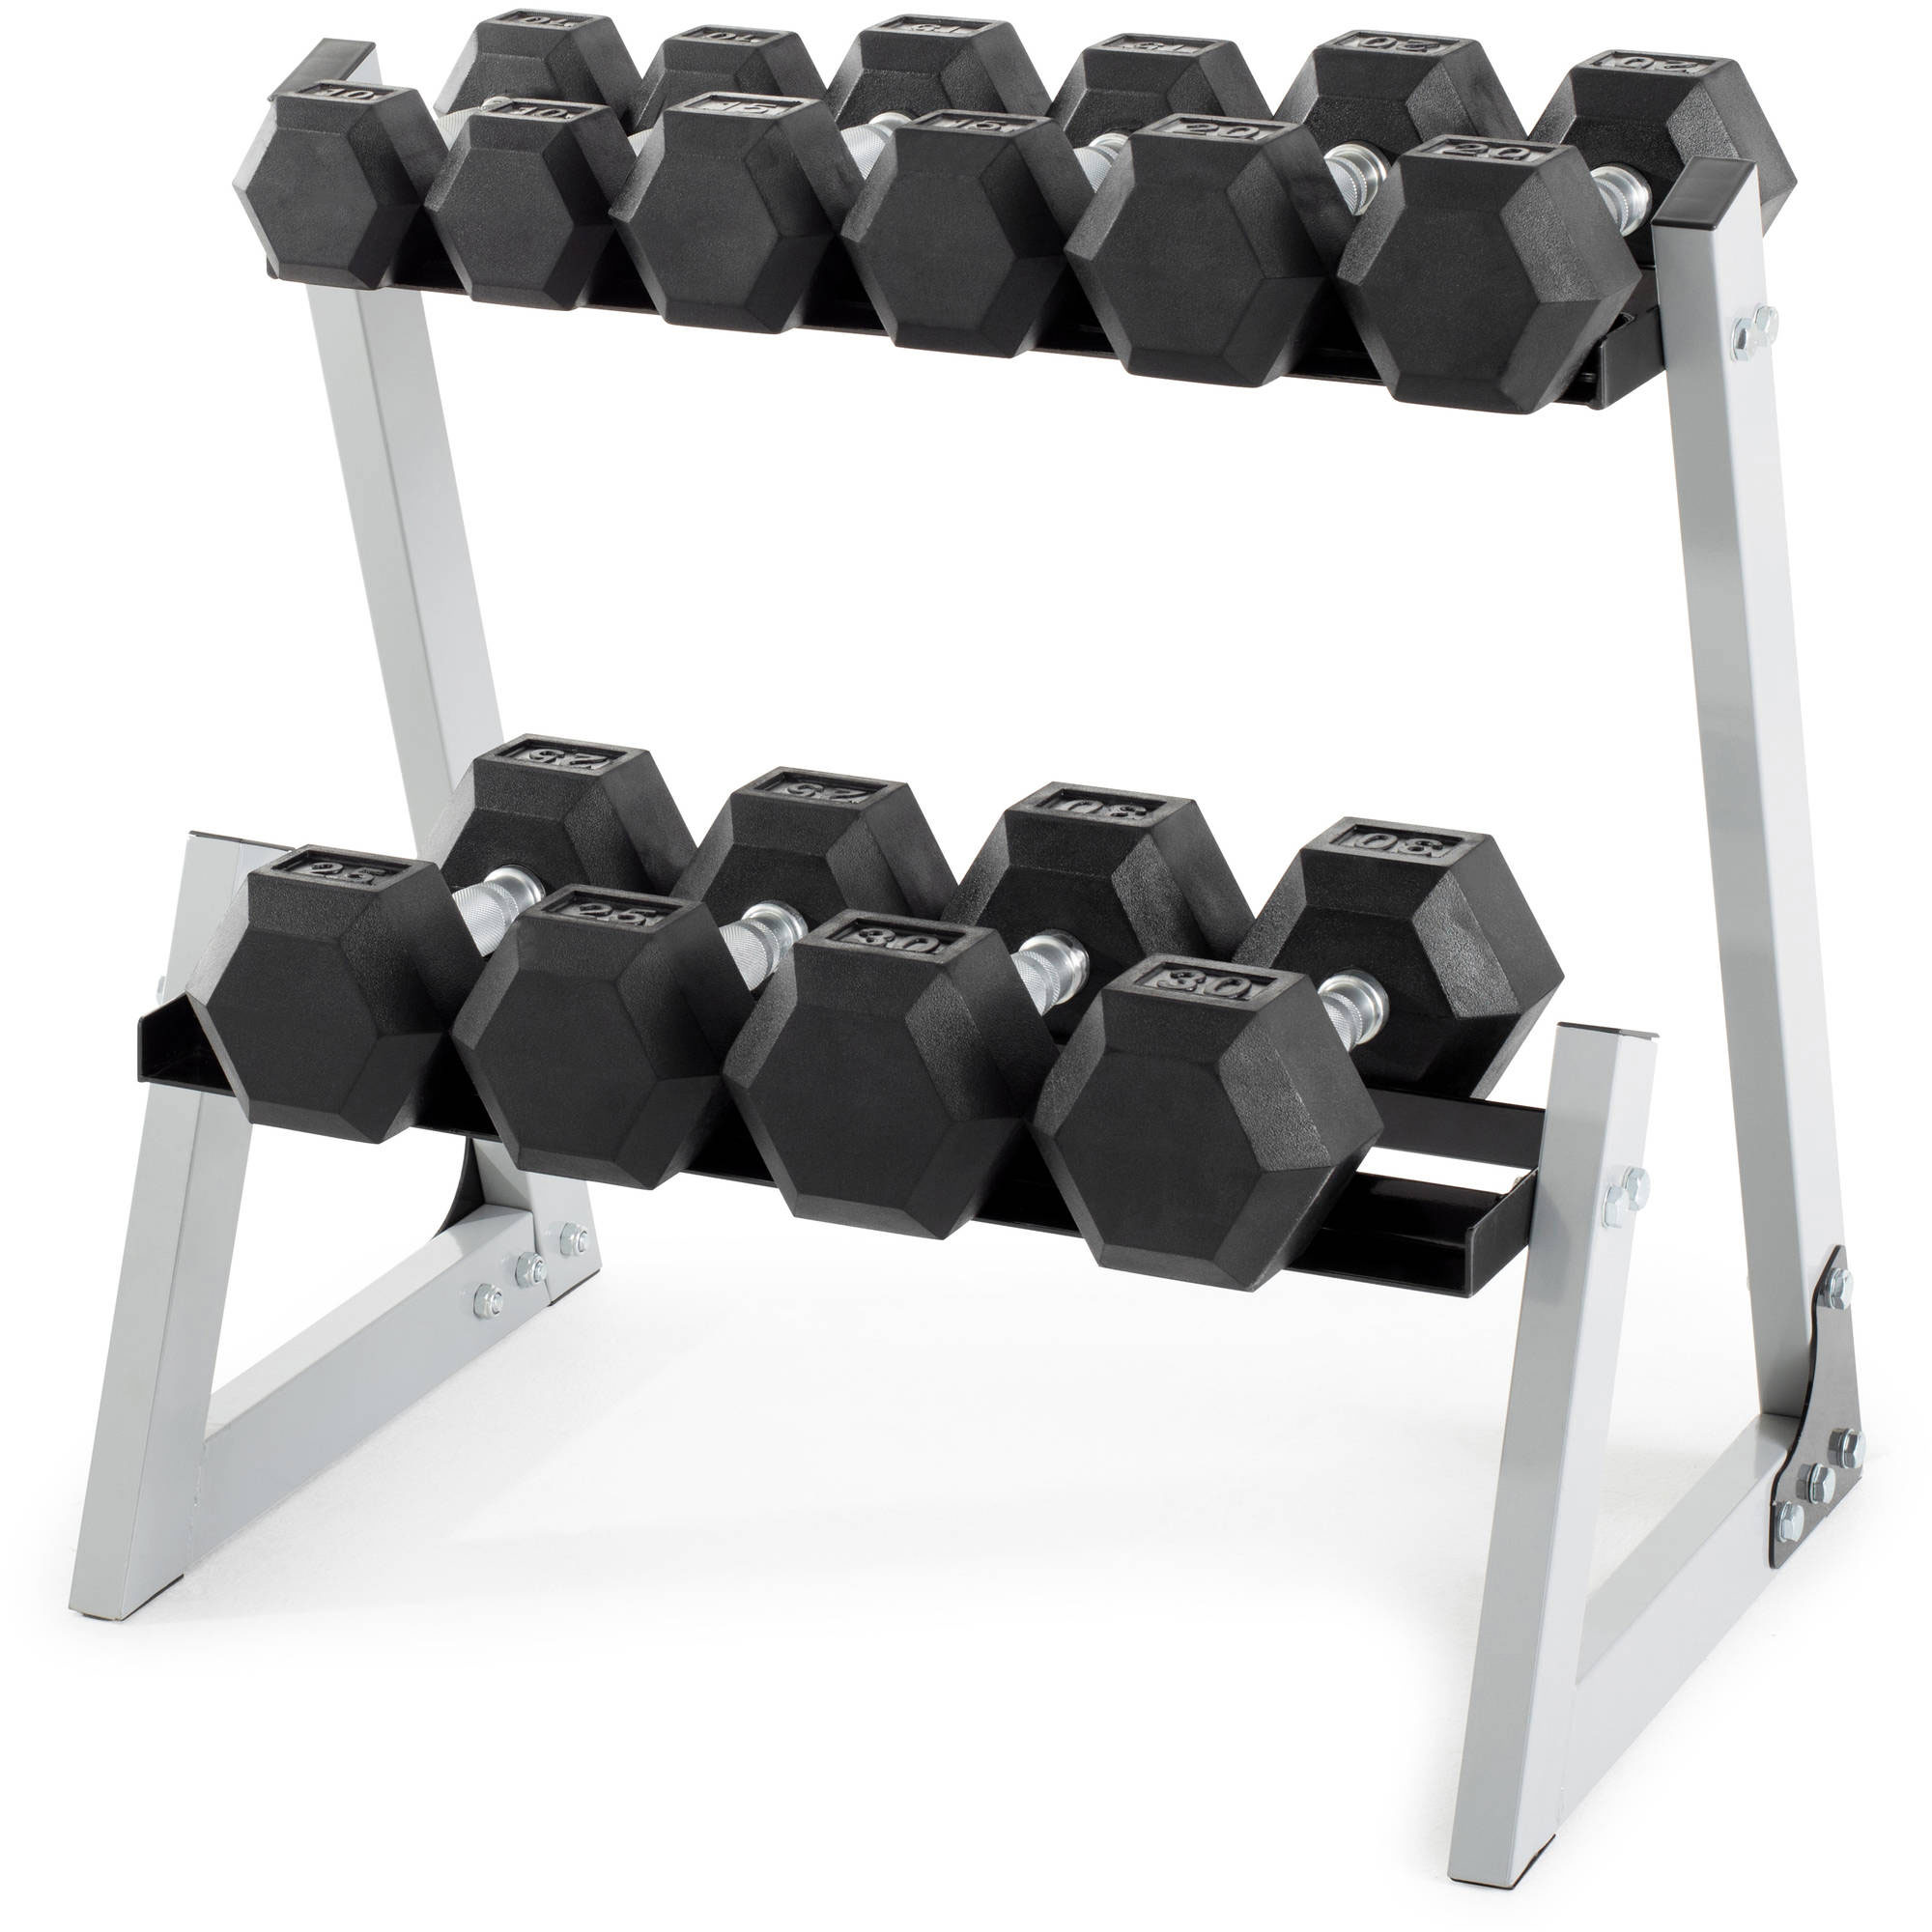 Weider 200 lb. Rubber Hex Dumbbell Weight Set with Weight Rack - image 1 of 12